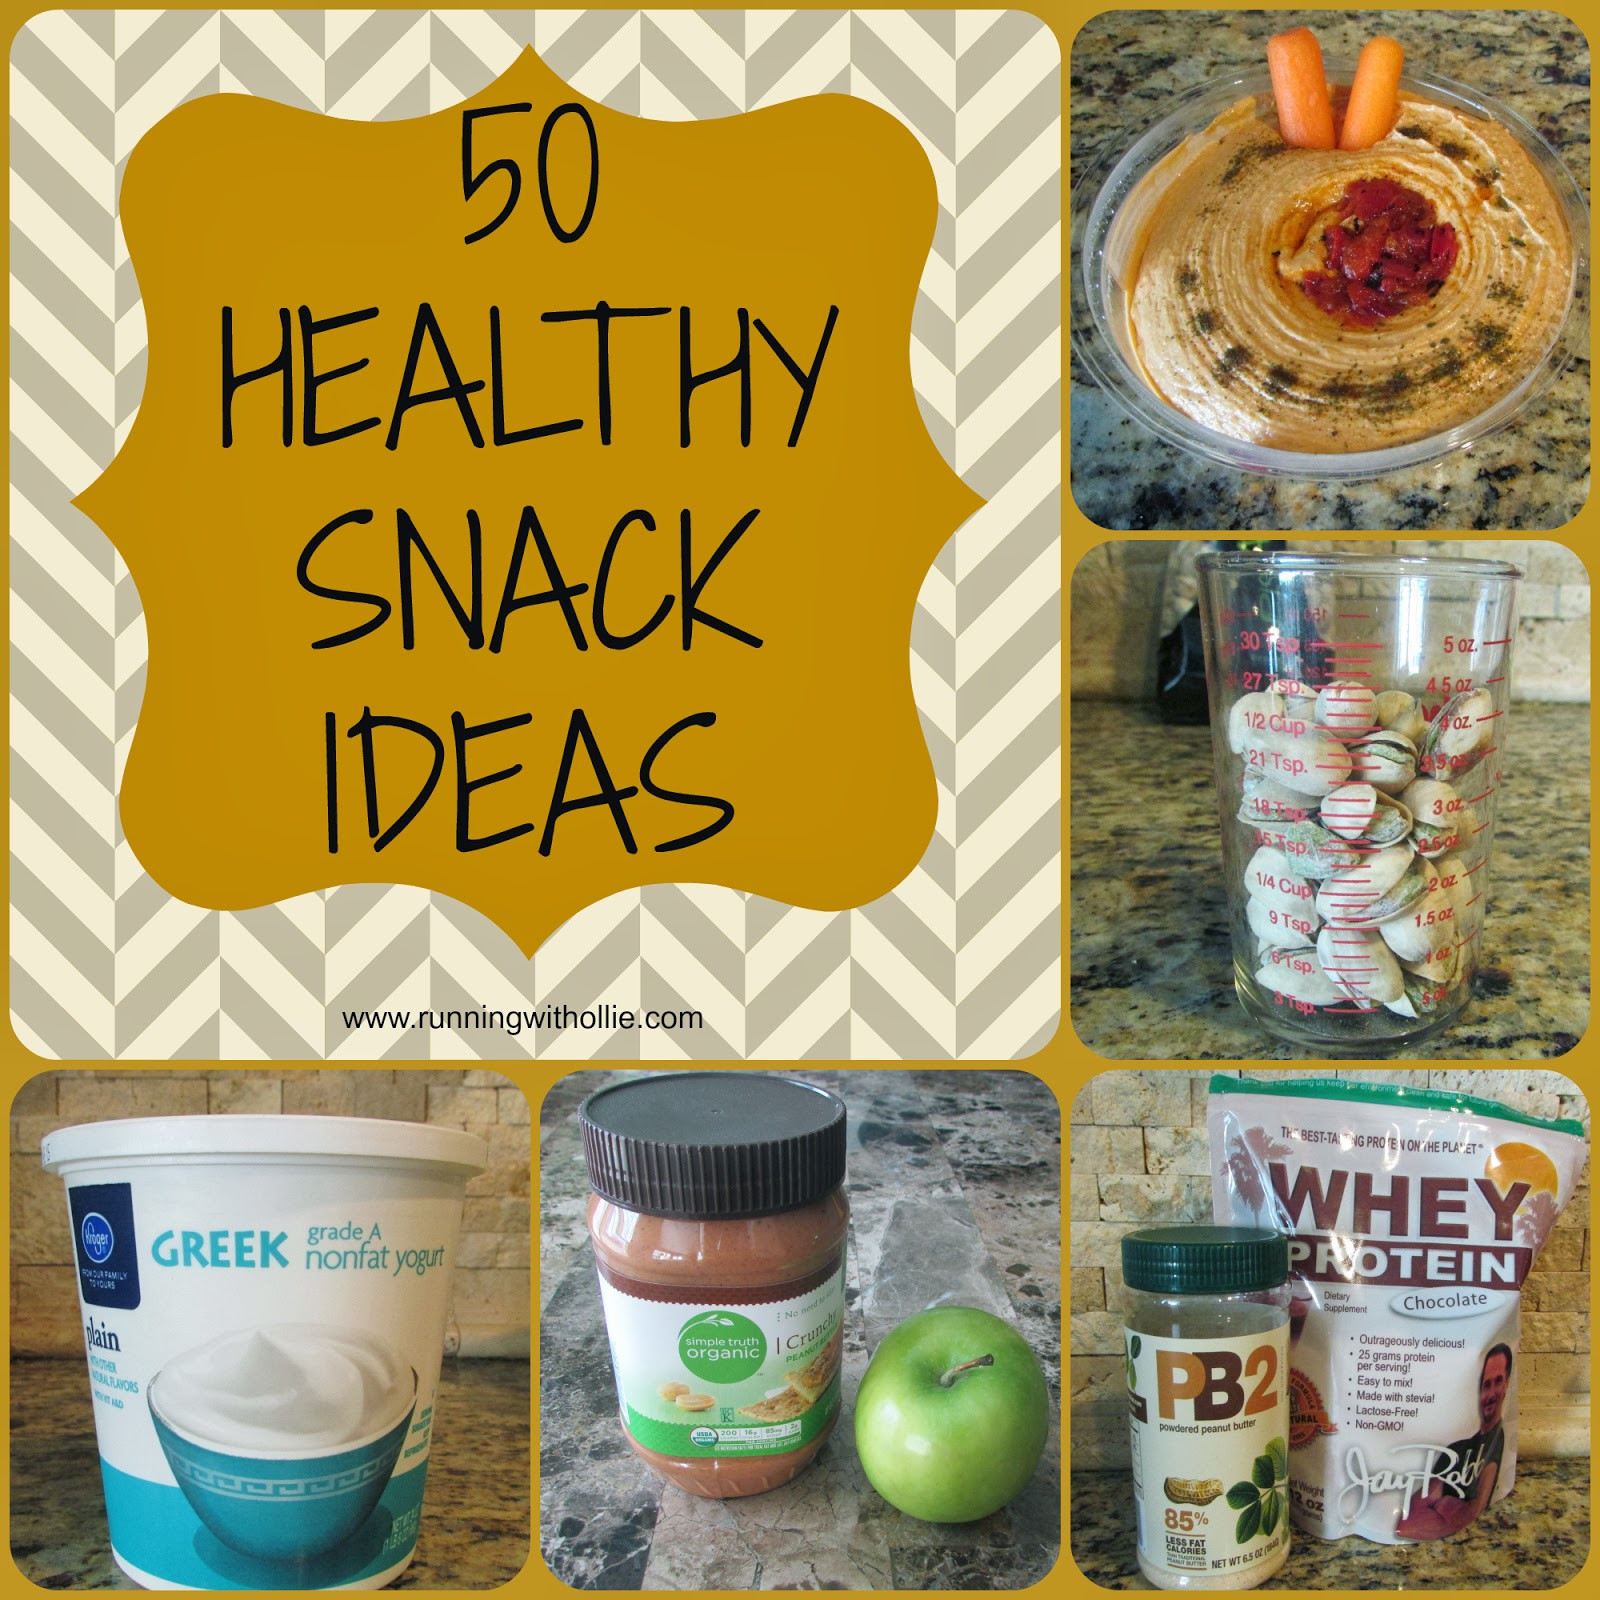 Healthy Quick Snacks
 RUNNING WITH OLLIE 50 Quick & Easy Healthy Snack Ideas